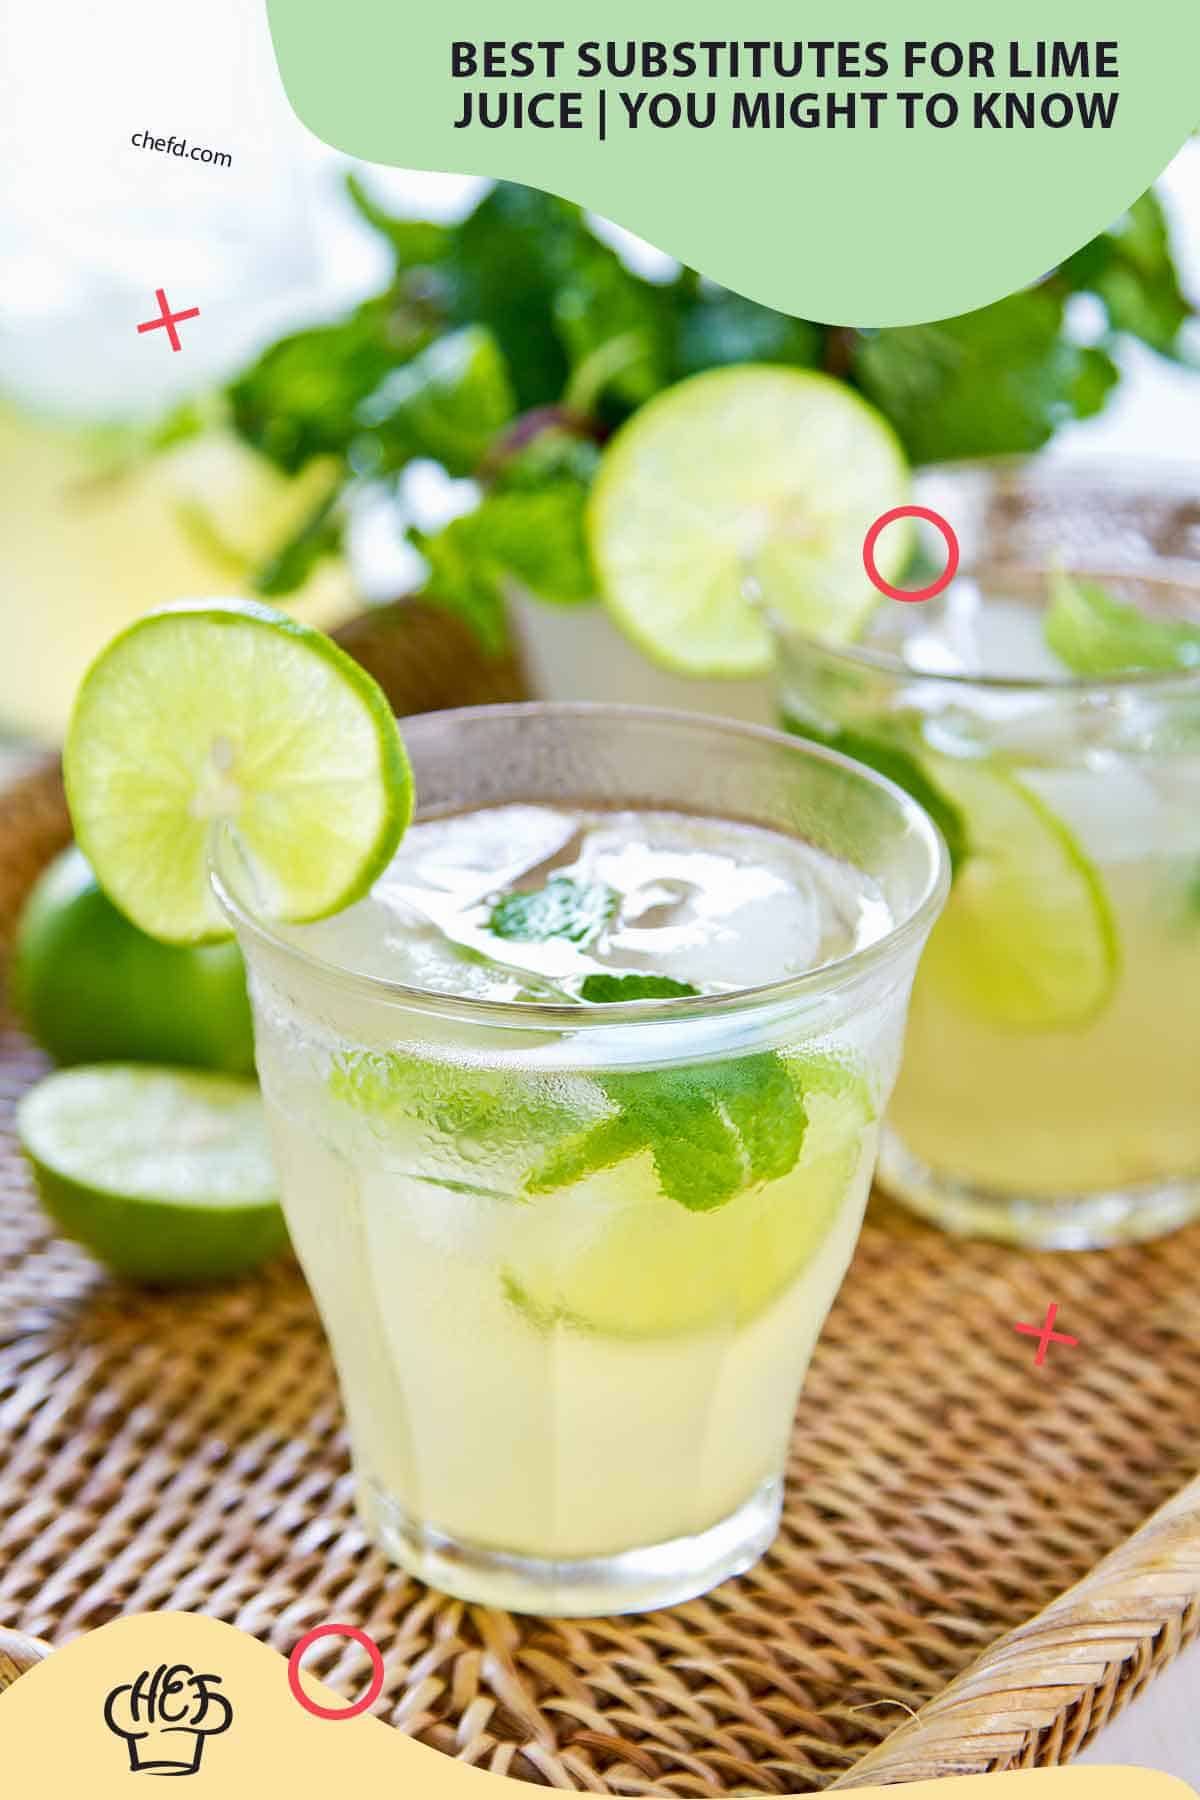 Image with substitutes for lime juice.